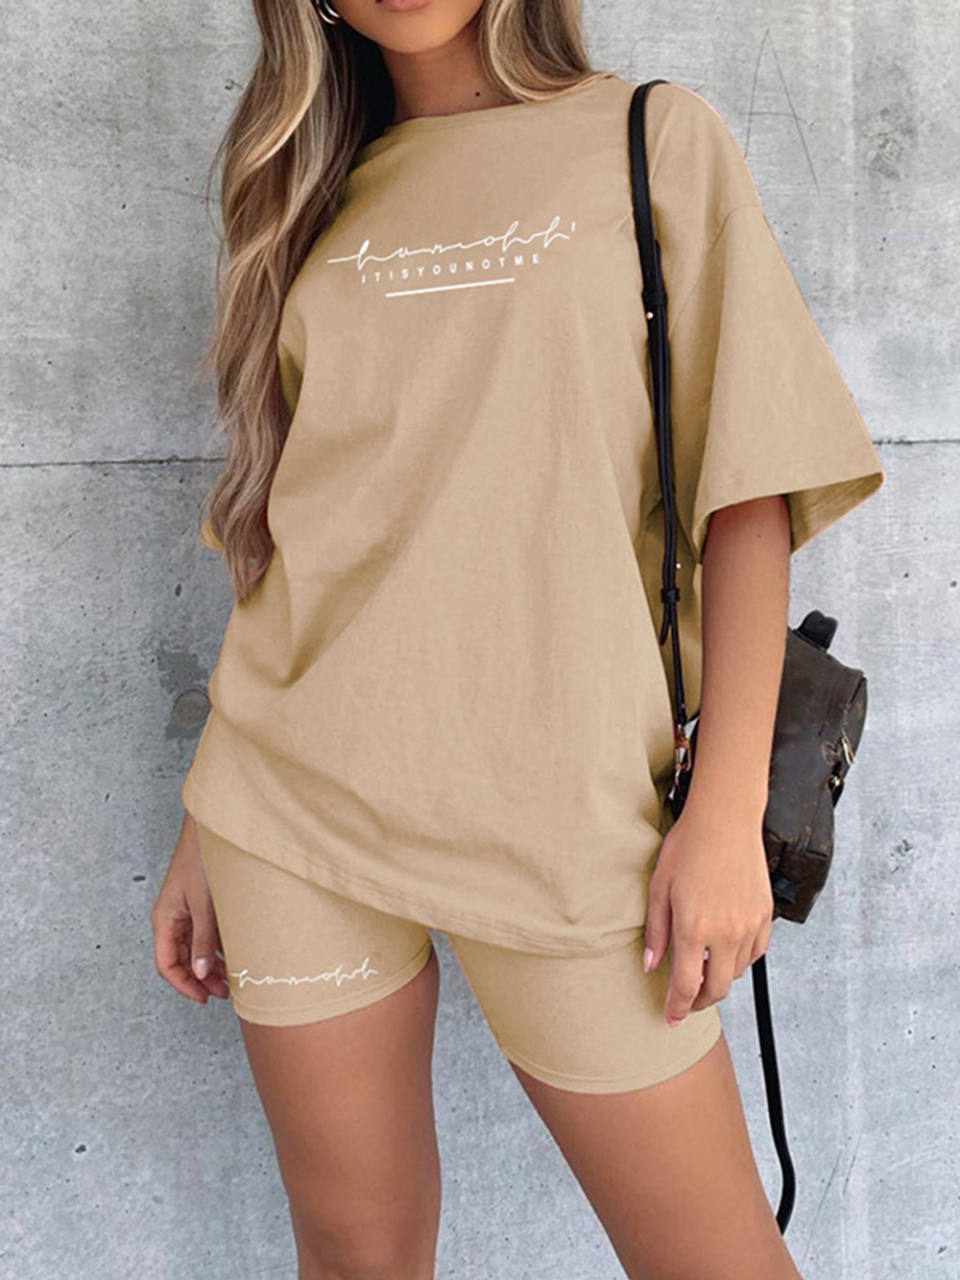 New letter printing fashion loose thin T-shirt casual sports two-piece suit